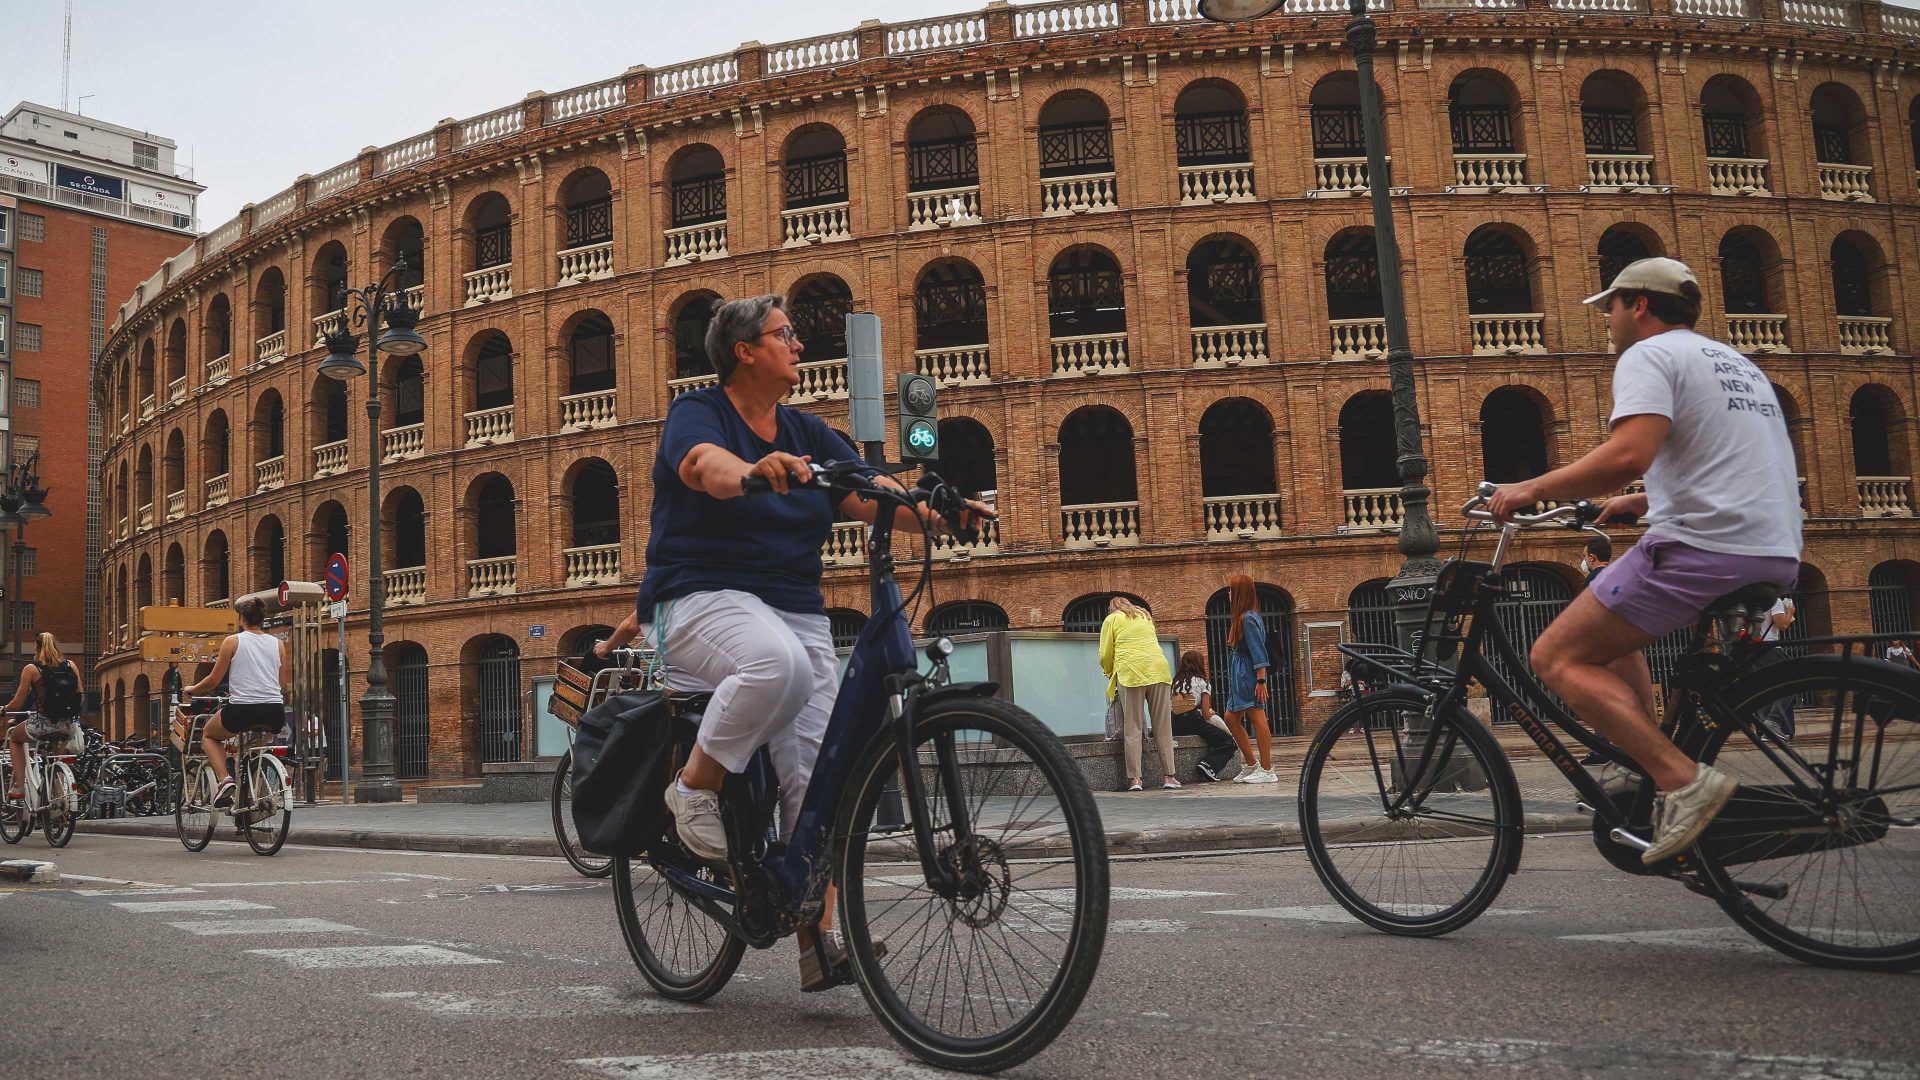 Prior to the election of the Spanish right in last year’s local elections, there were plans for the construction of nine bicycle lanes in Valencia. Photo: Rober Solsona/Europa Press/Getty